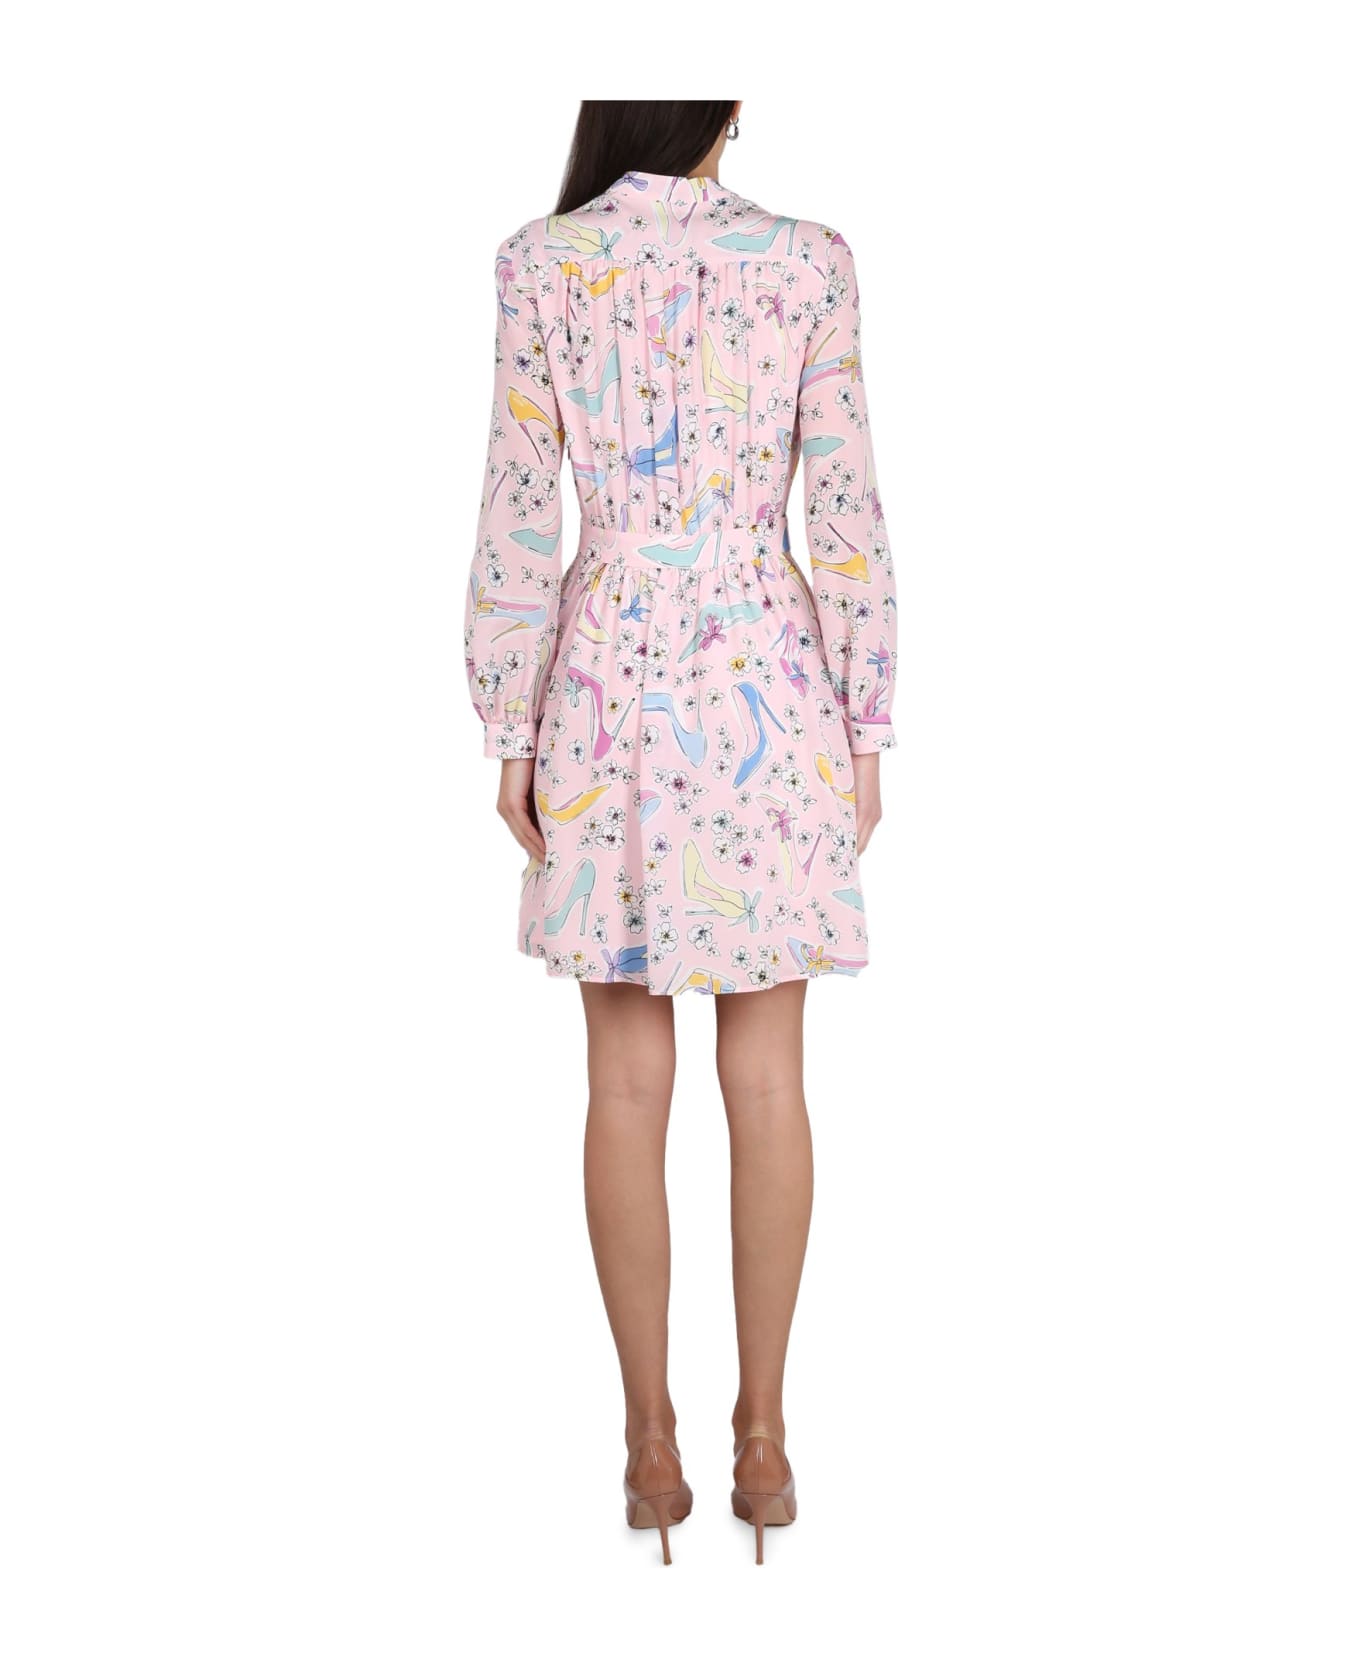 Boutique Moschino Heels And Flowers Dress - ROSA